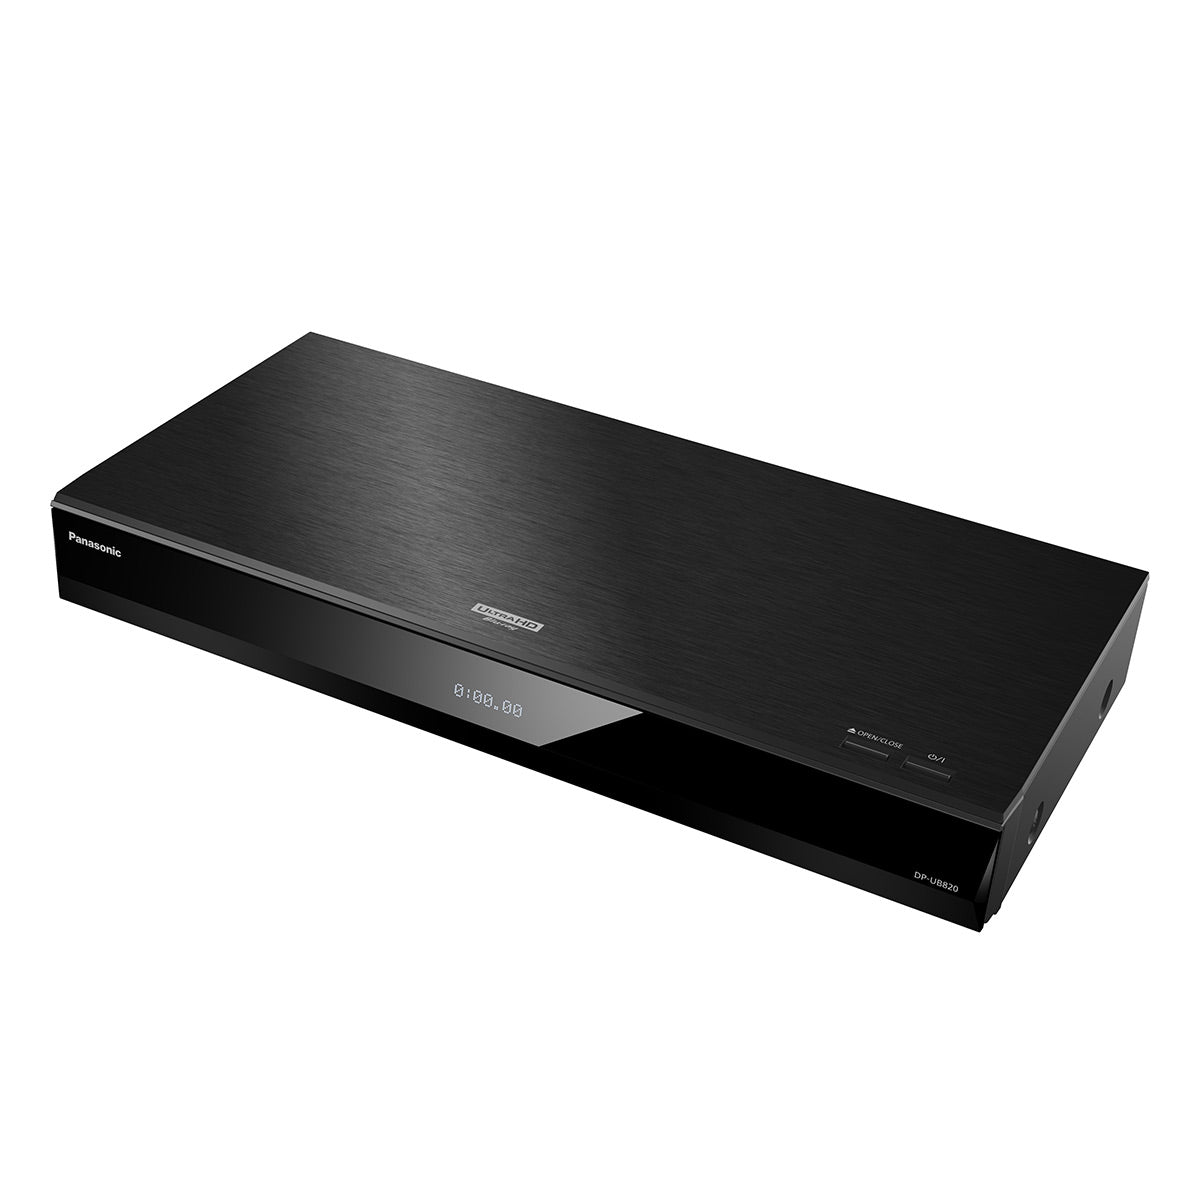 Panasonic DP-UB820-K 4K Ultra HD Blu-ray Player with HDR10+ and Dolby Vision Playback